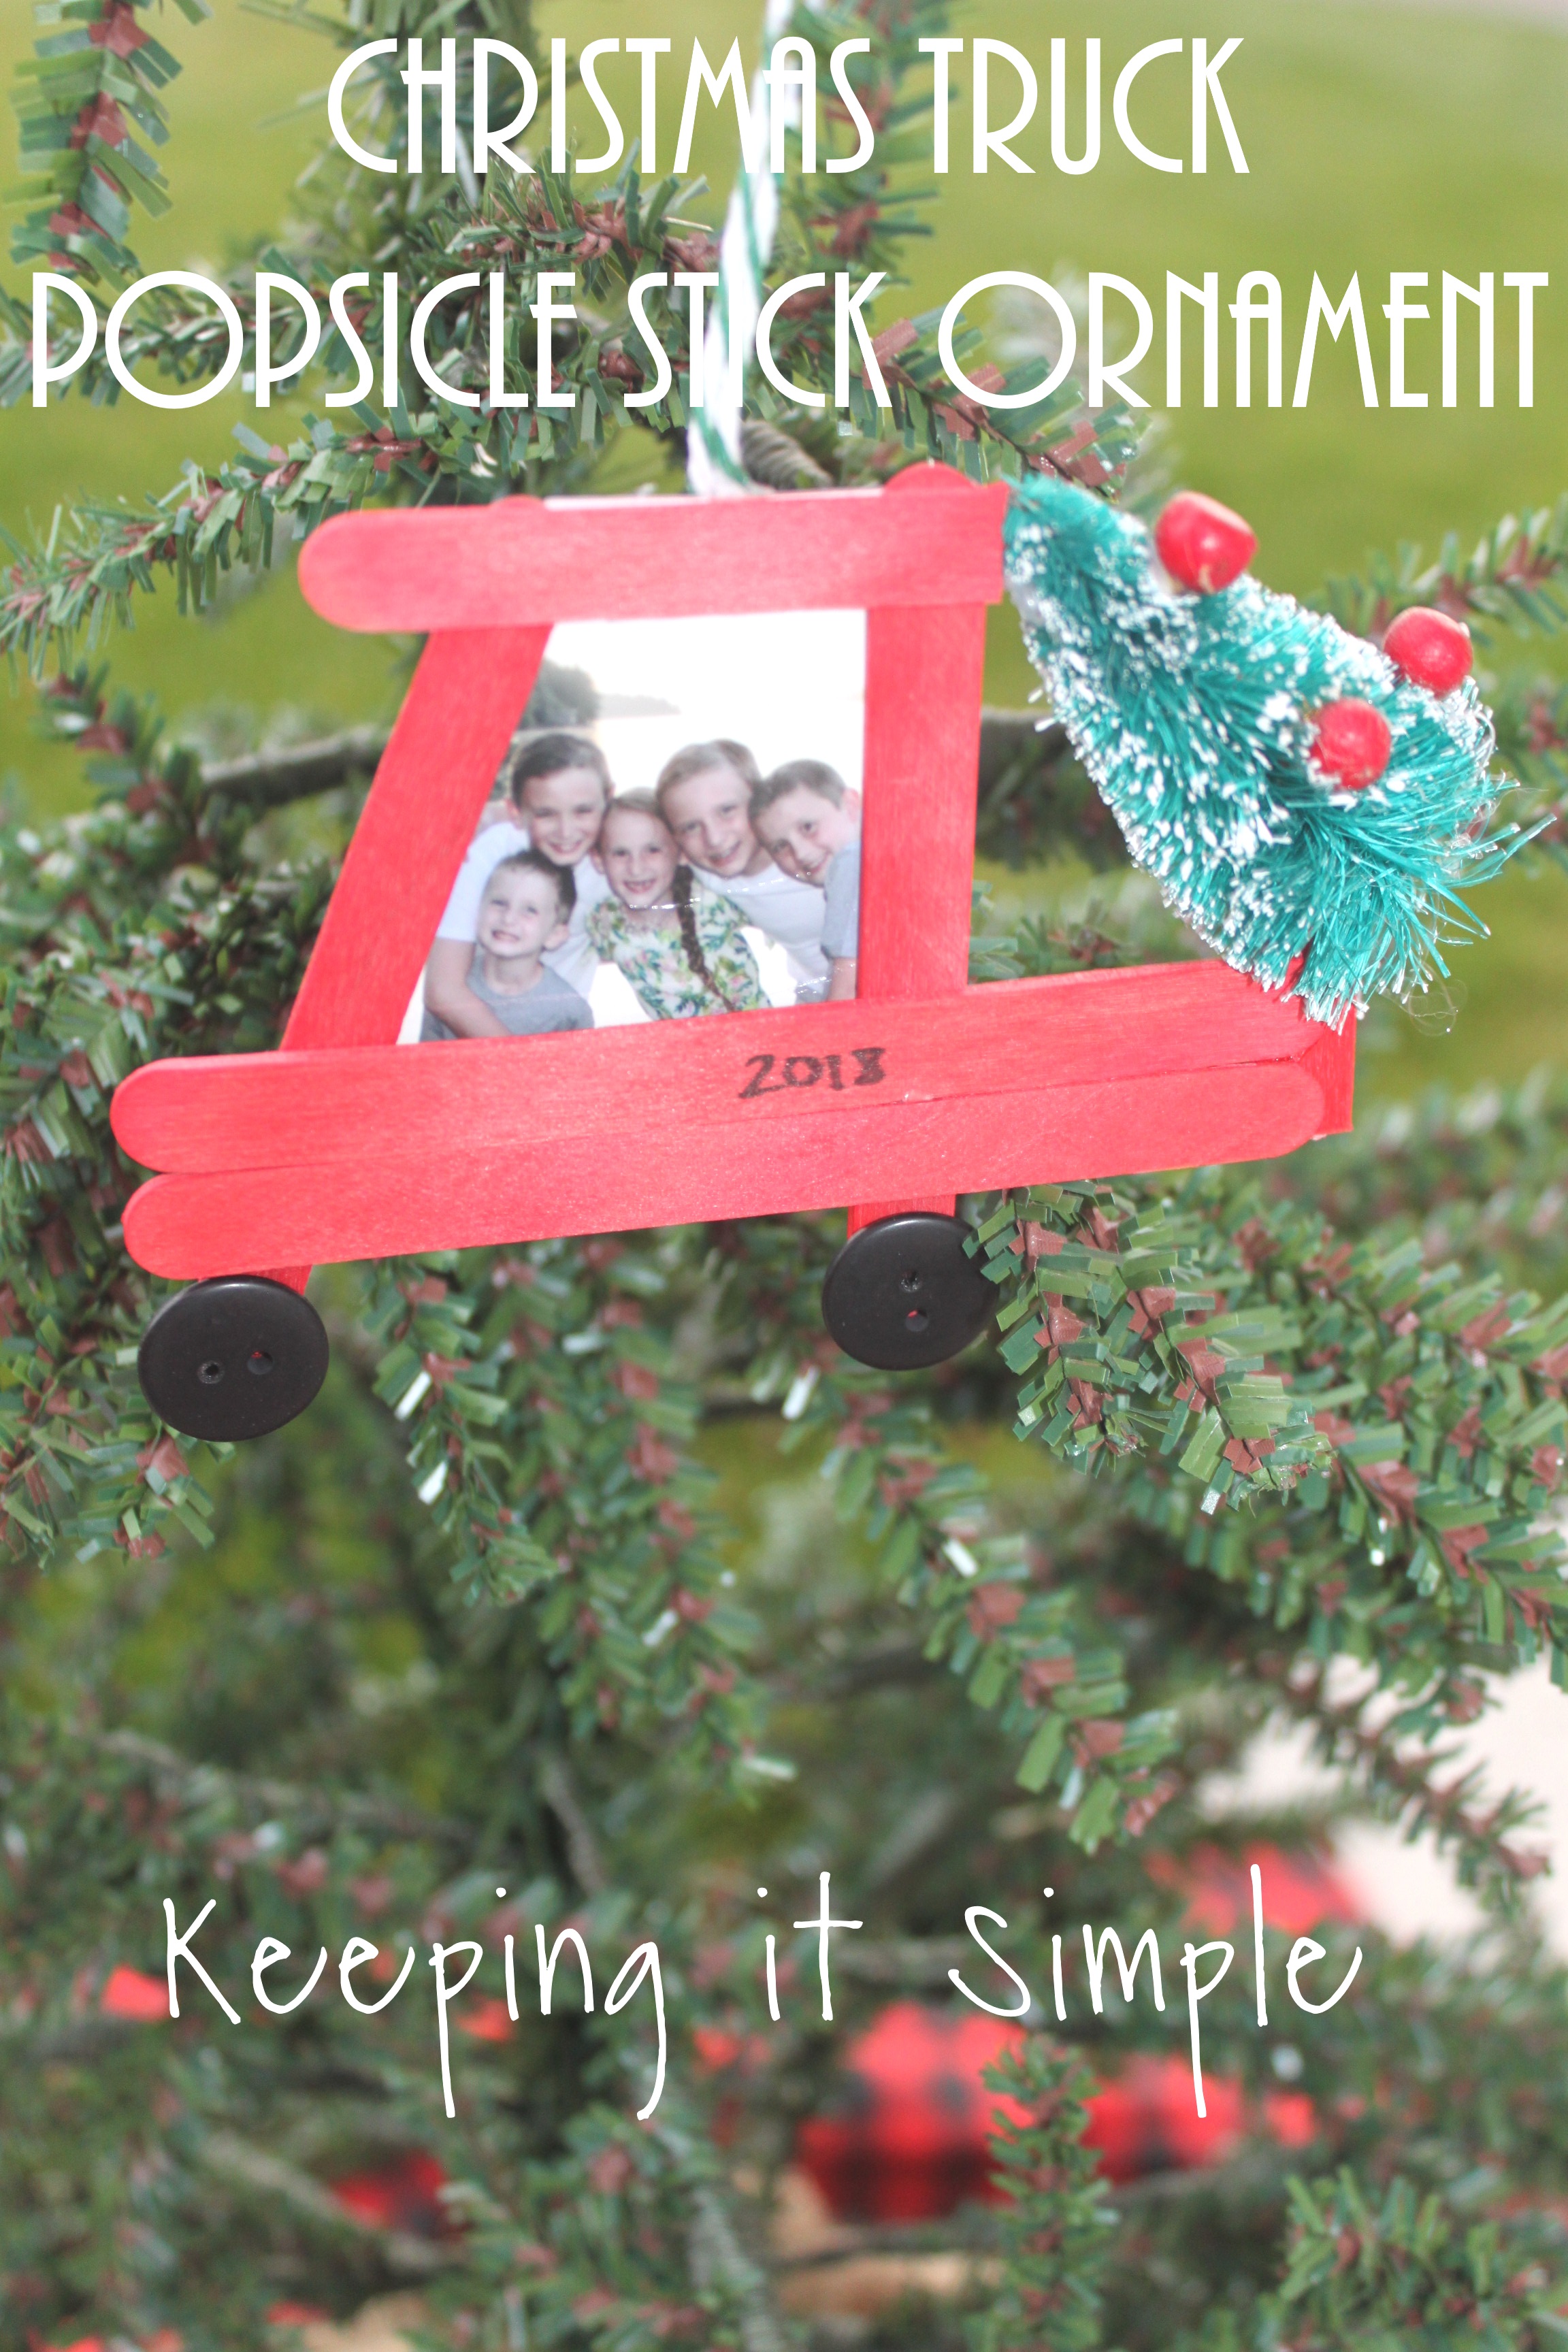 Christmas Truck Popsicle Stick Ornament - Keeping it Simple